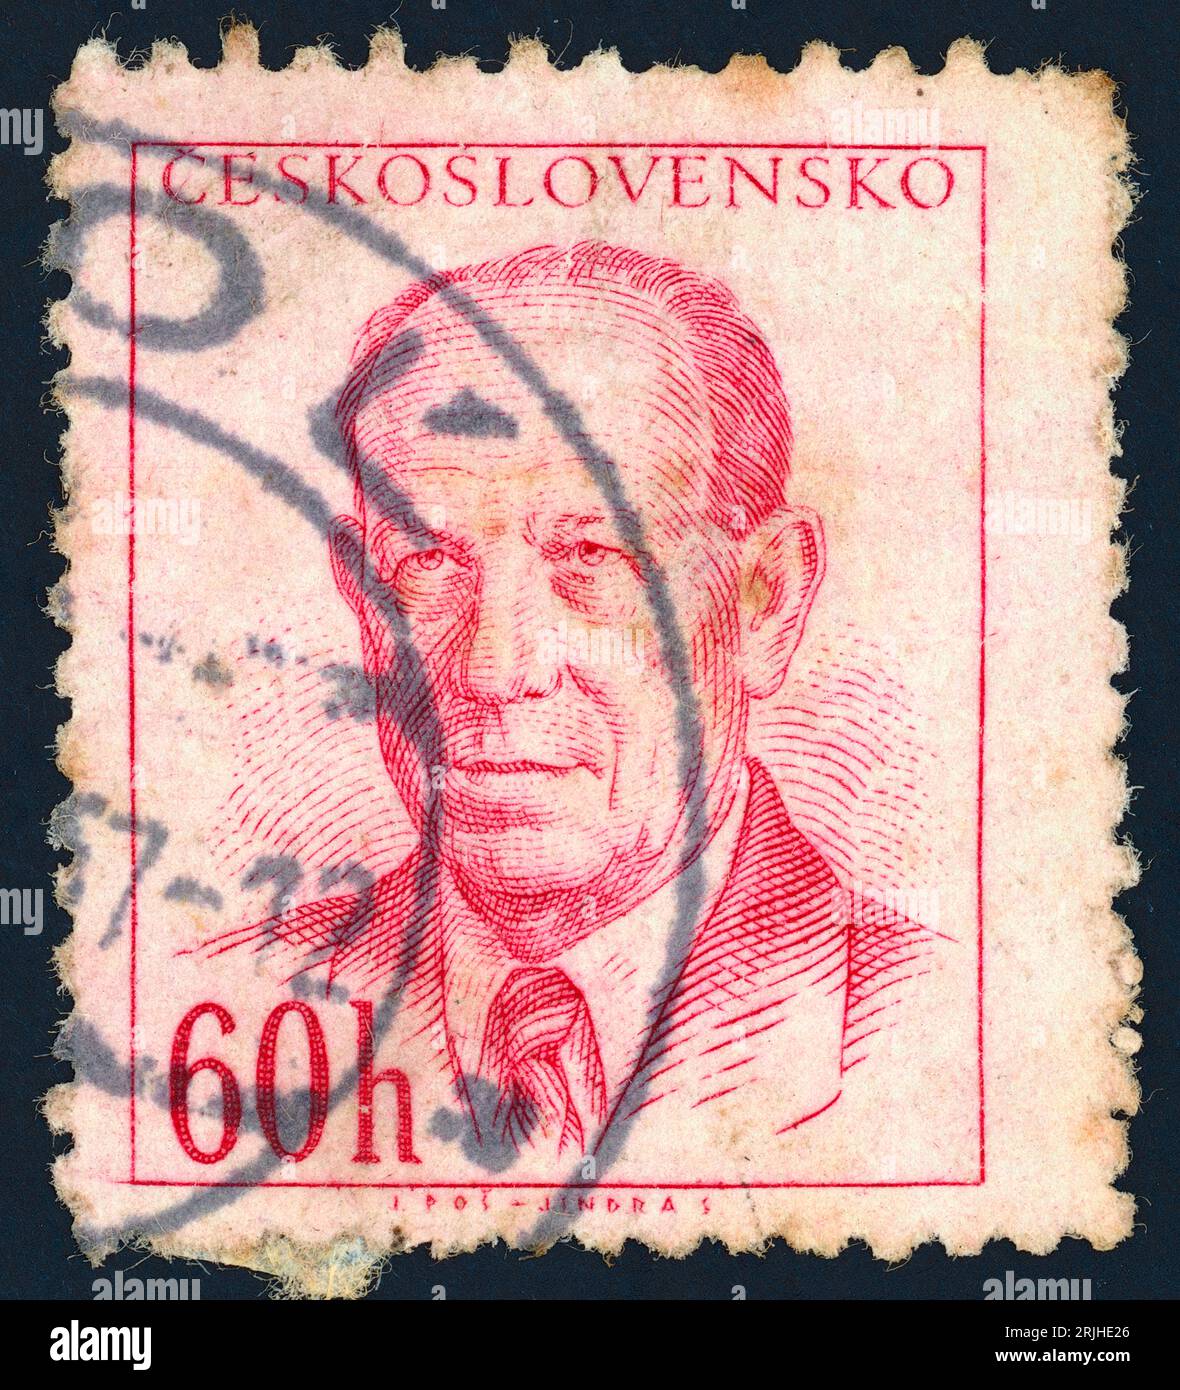 Antonín Zápotocký (1884 – 1957). Postage stamp issued in Czechoslovakia in 1953. Antonín Zápotocký was a Czech communist politician and statesman who served as the prime minister of Czechoslovakia from 1948 to 1953 and the president of Czechoslovakia from 1953 to 1957. Stock Photo